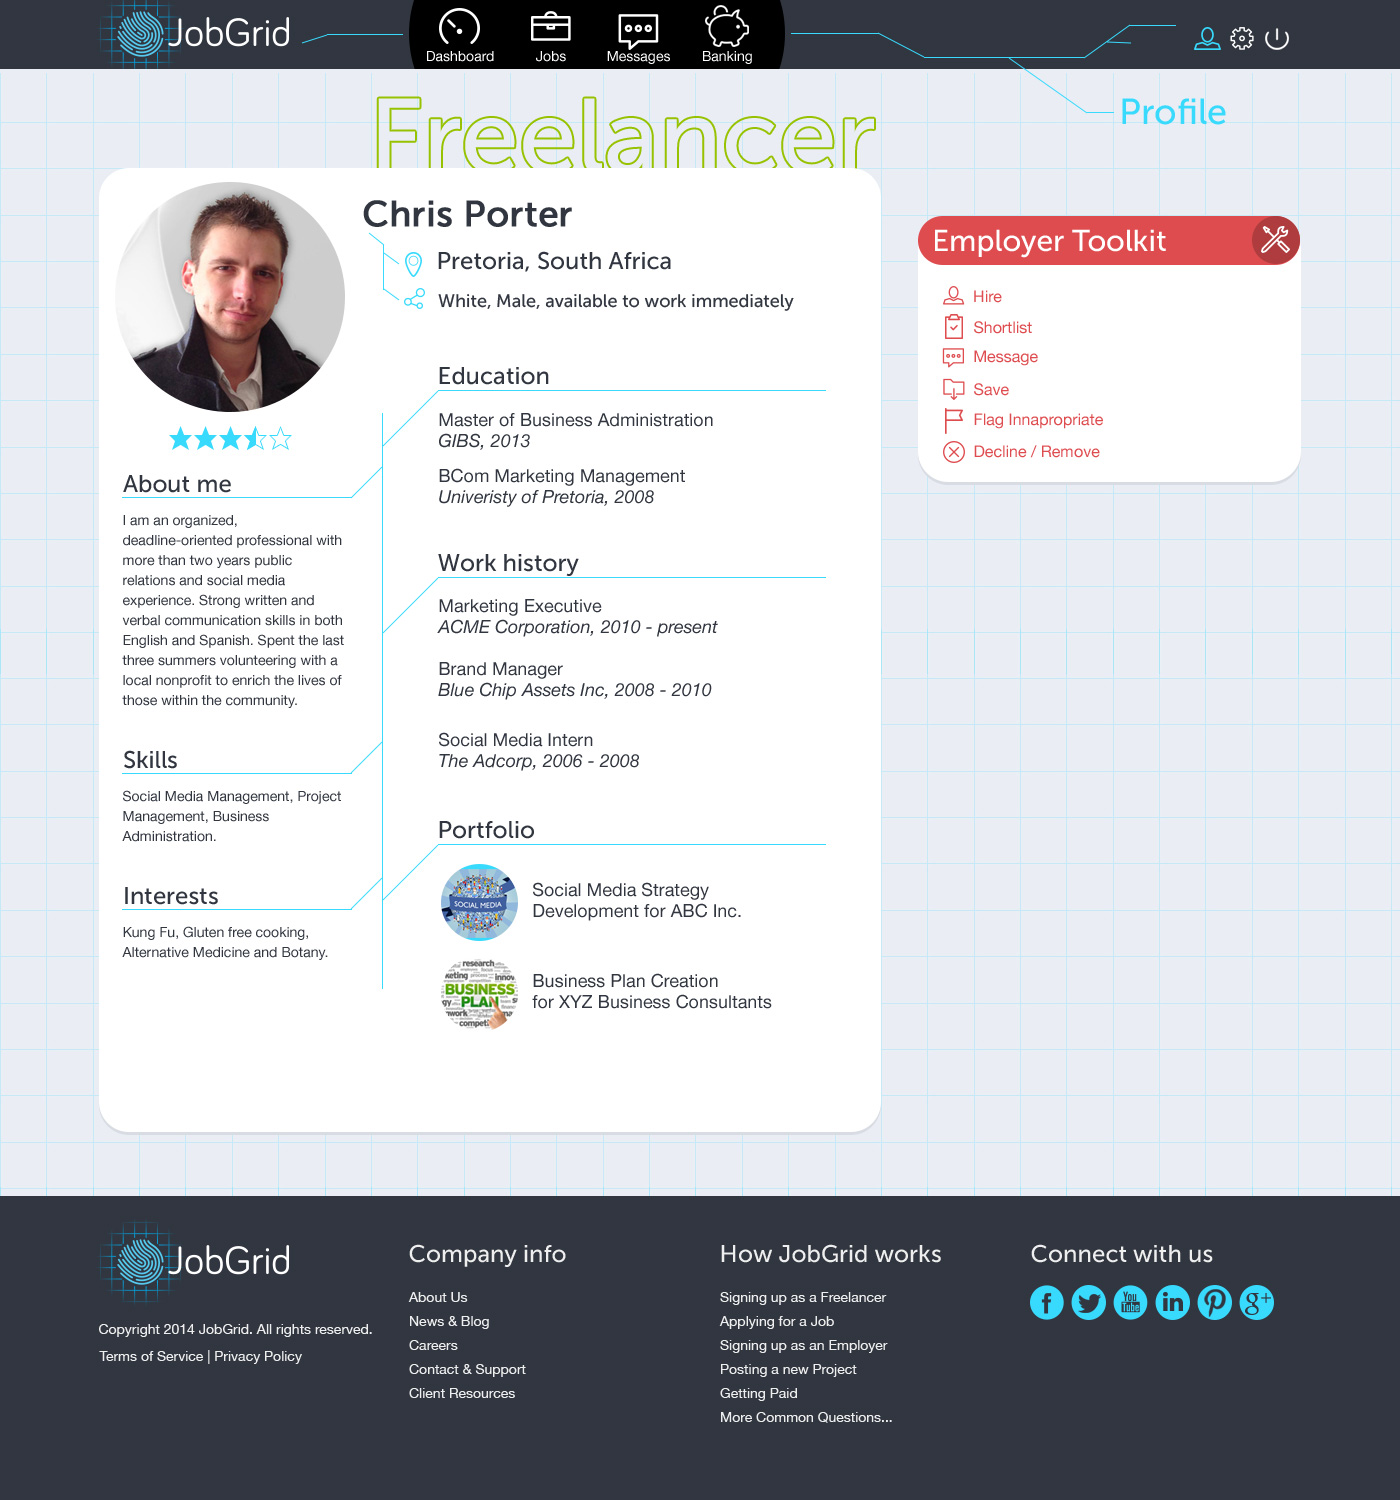 JobGrid-Employer-Candidate-Profile-View